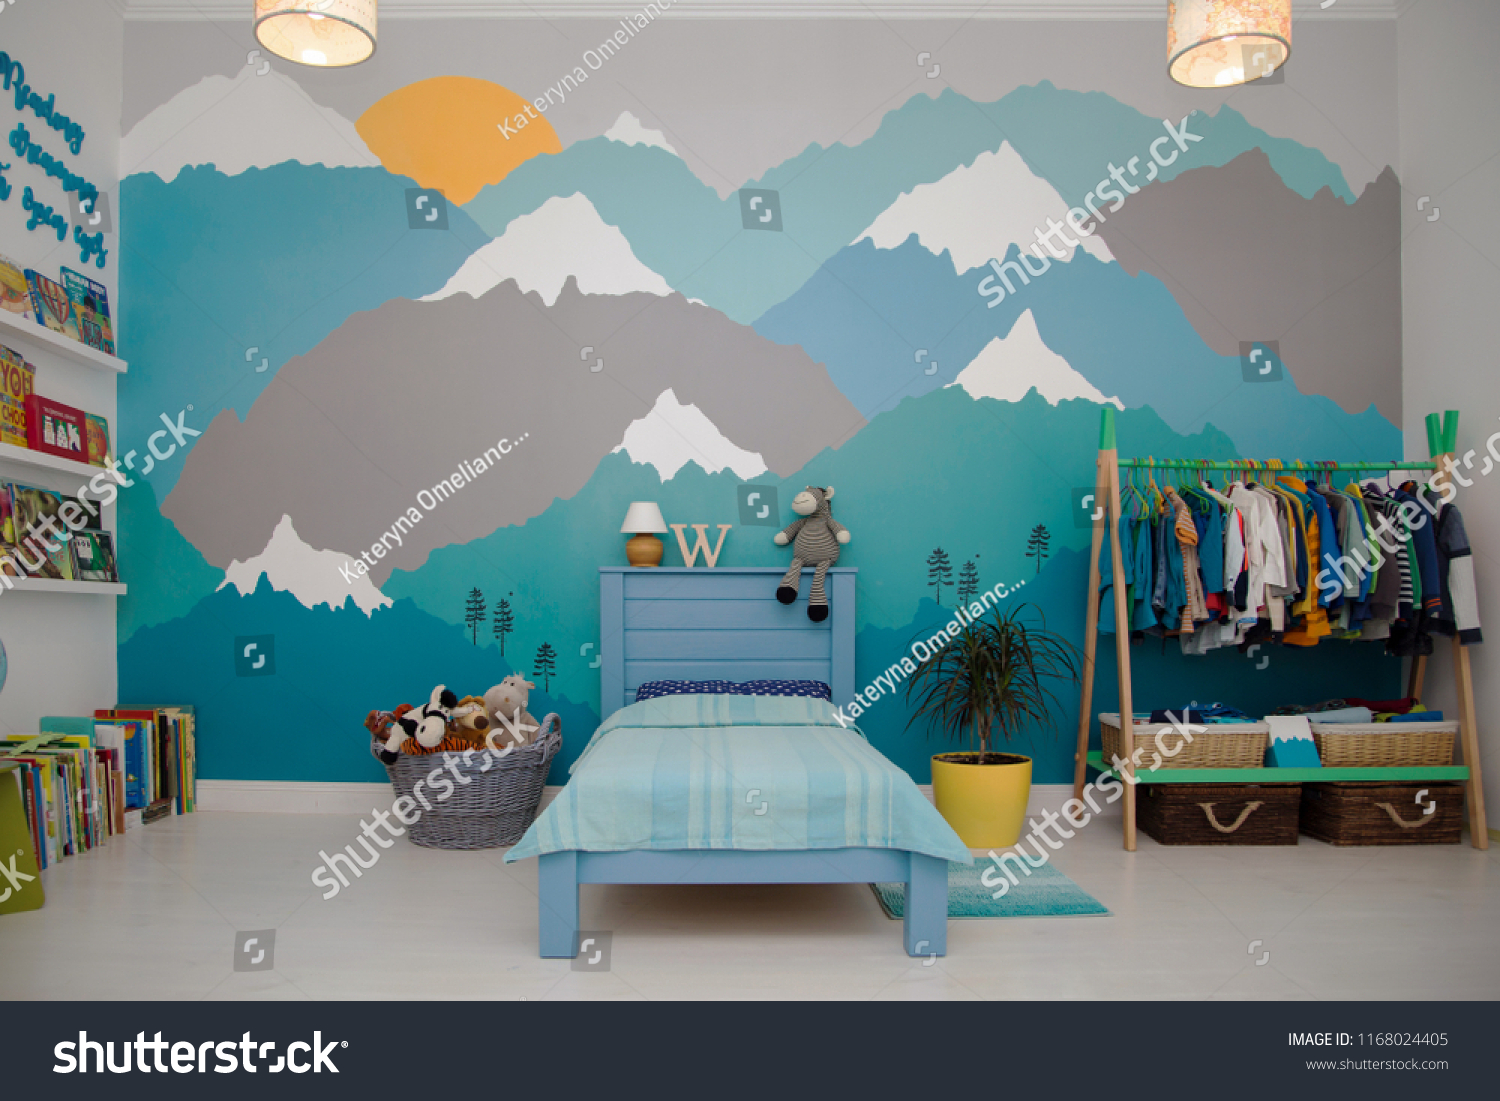 A spacious boy bedroom with a beautiful turquoise and grey mountain wall mural and bookshelves #1168024405